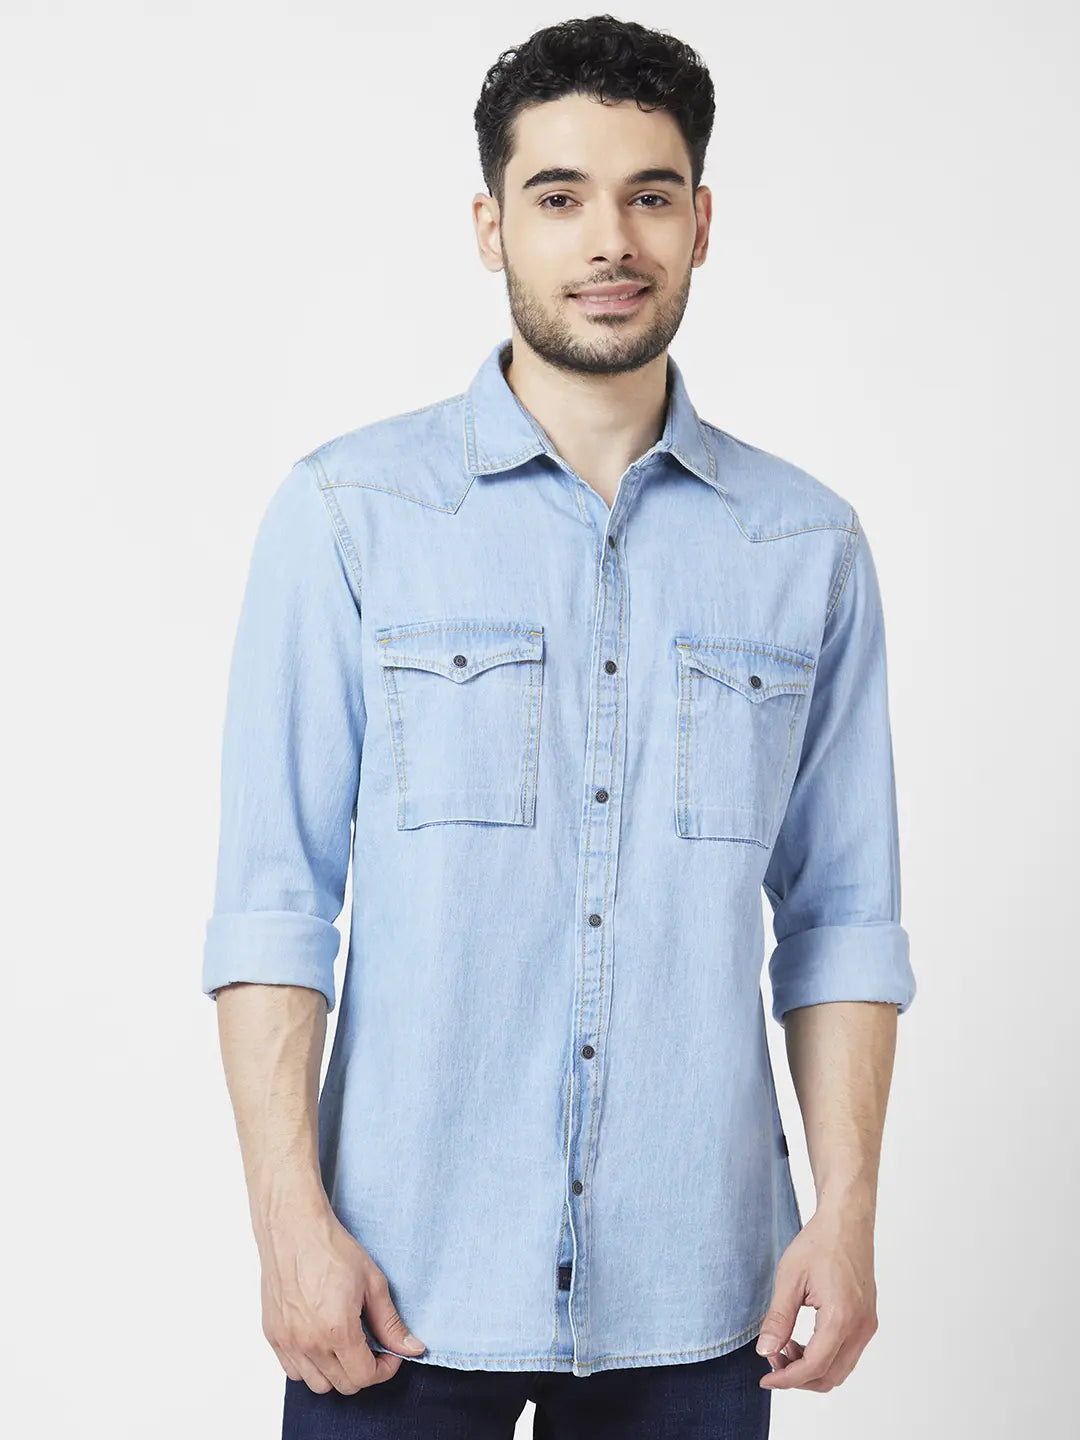 Mens Denim Jeans Shirts Manufacturer Supplier from Bangalore India